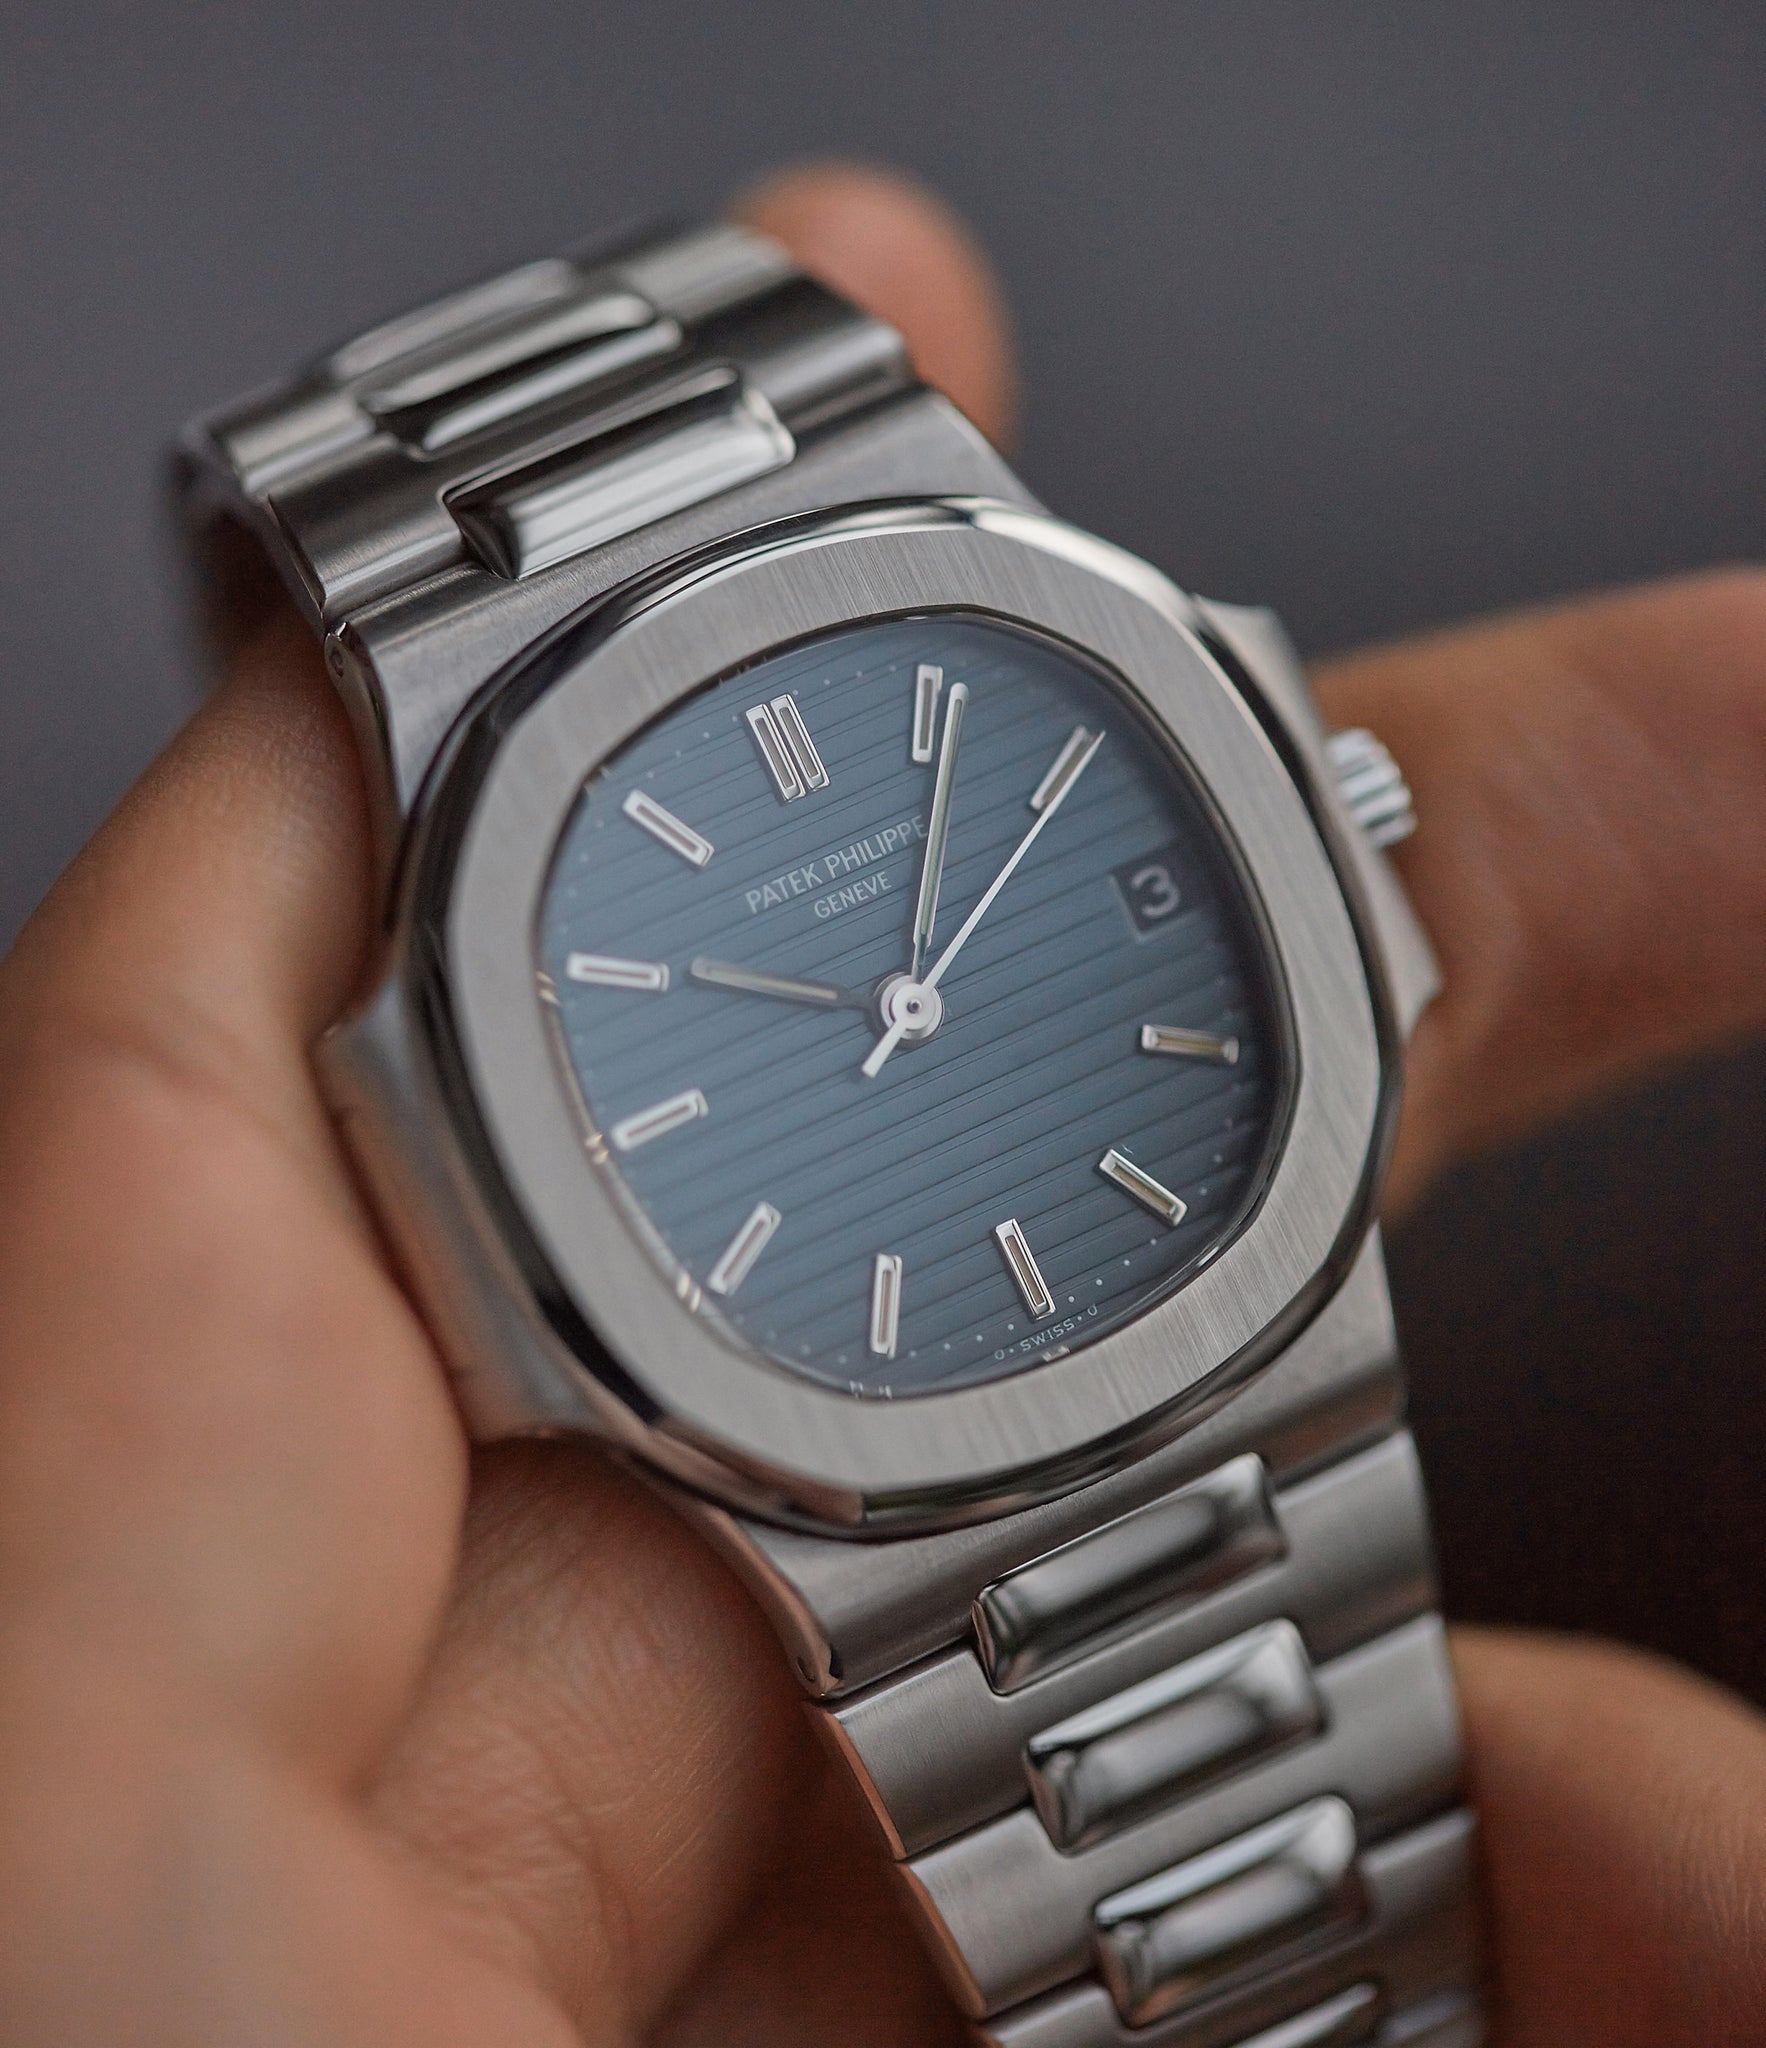 shop pre-owned Patek Philippe Nautilus 3800 Sigma dial steel luxury sports watch for sale online A Collected Man London UK specialist rare watches